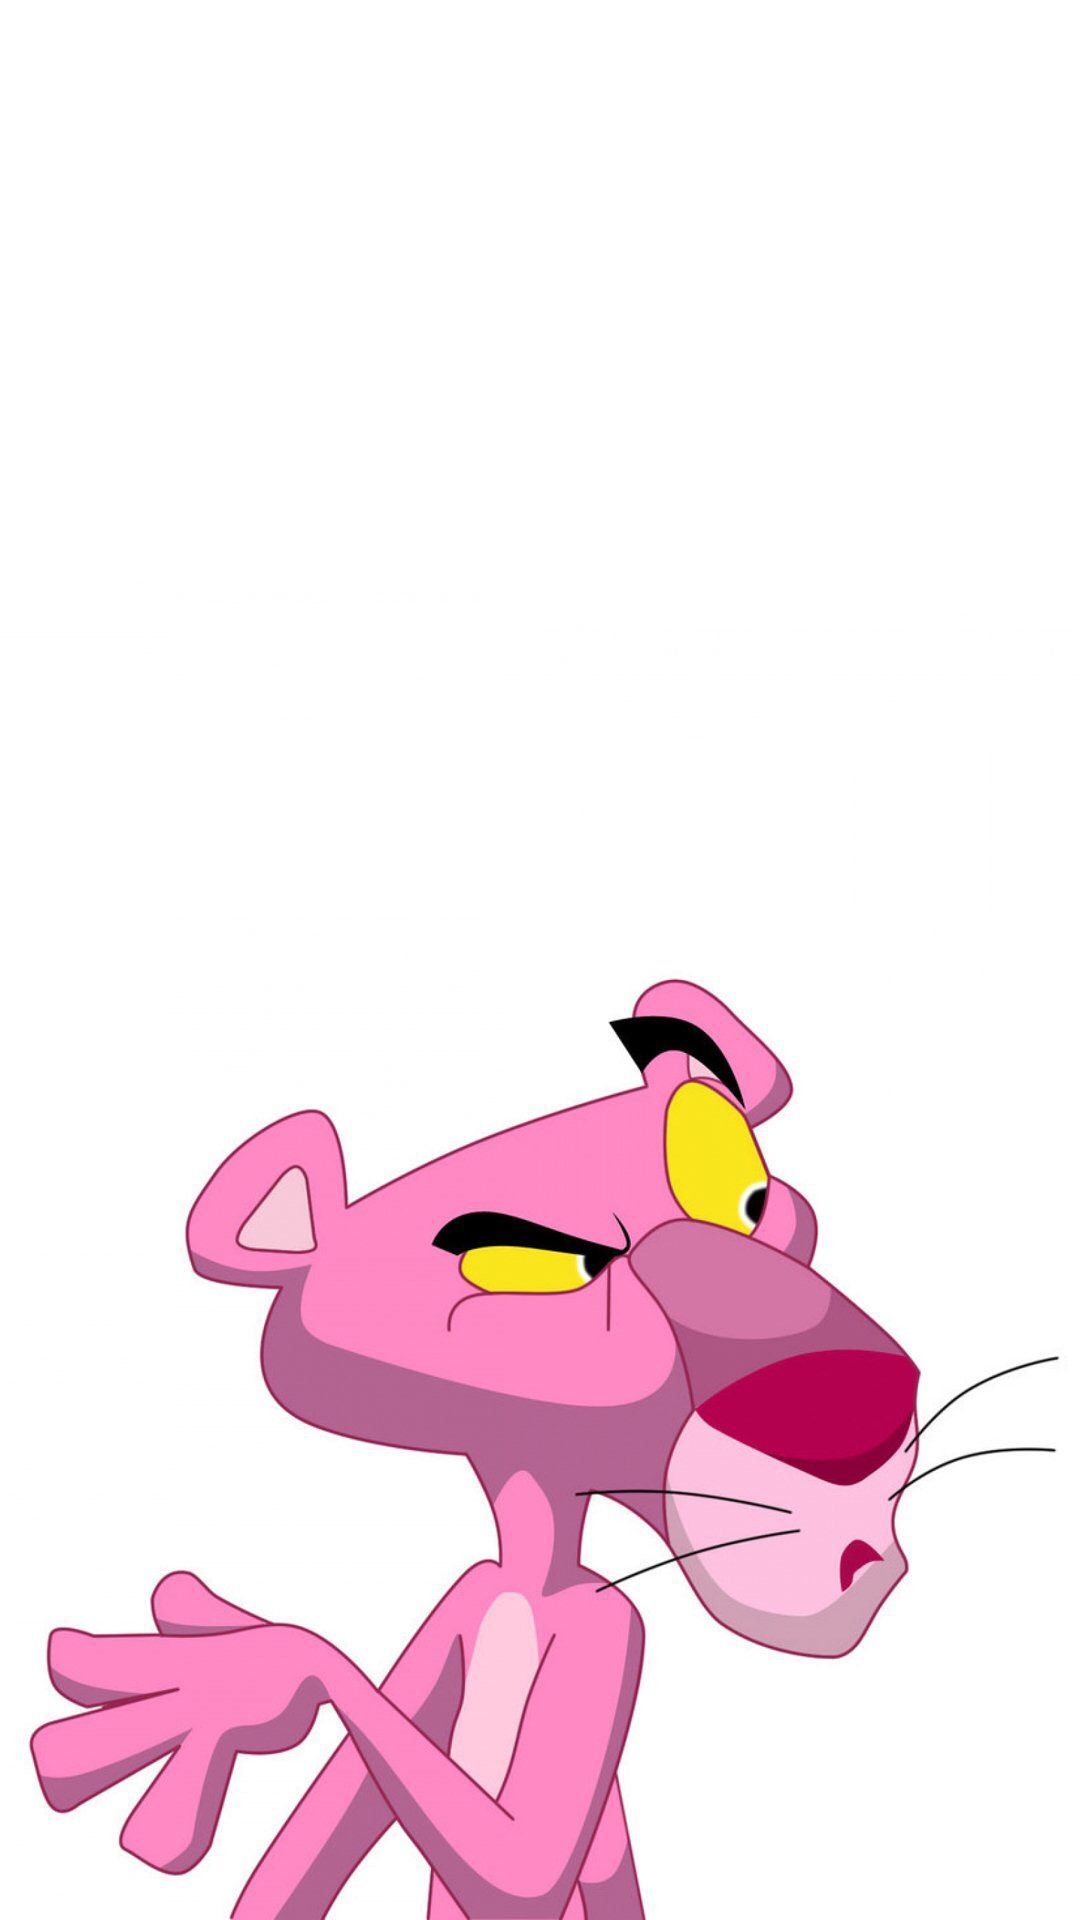 Pink Panther Wallpapers (49+ pictures)